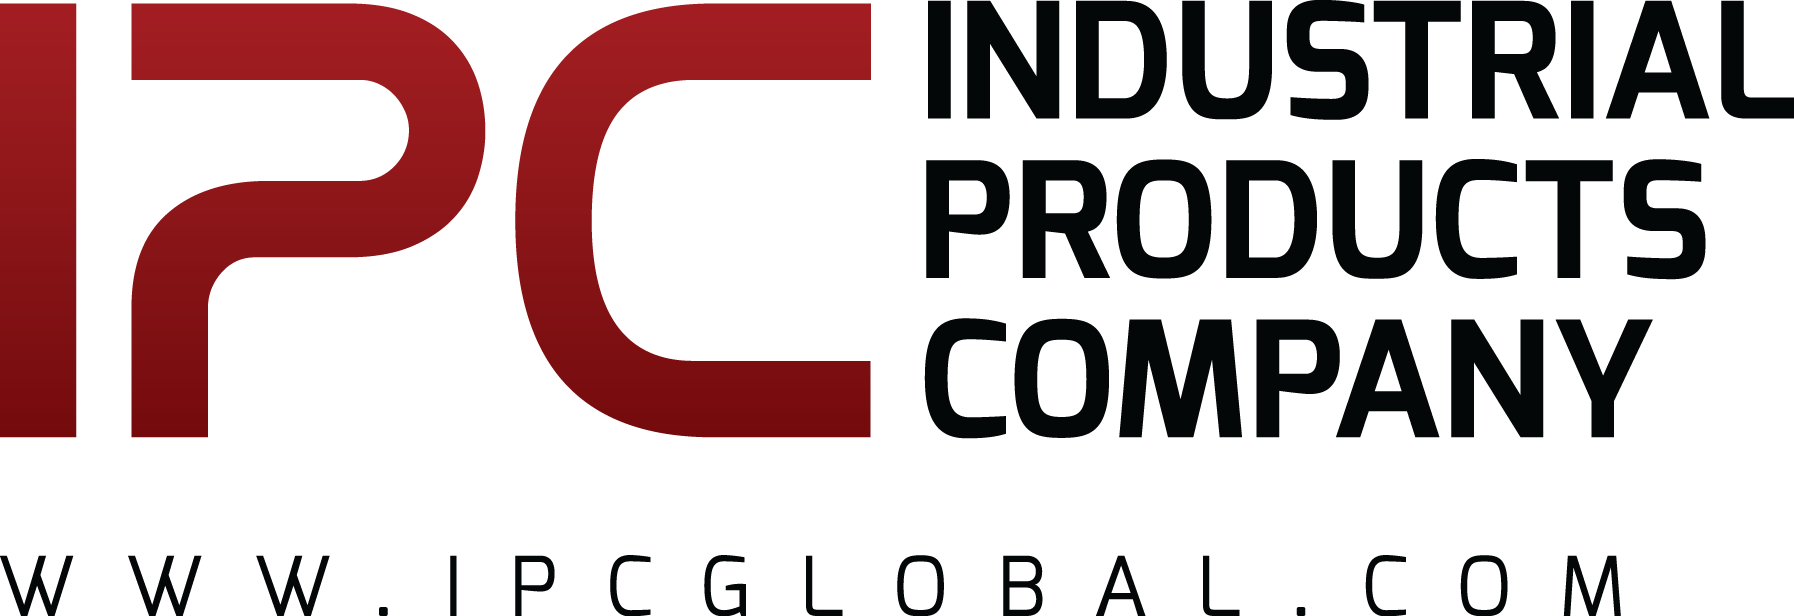 Industrial Products Company